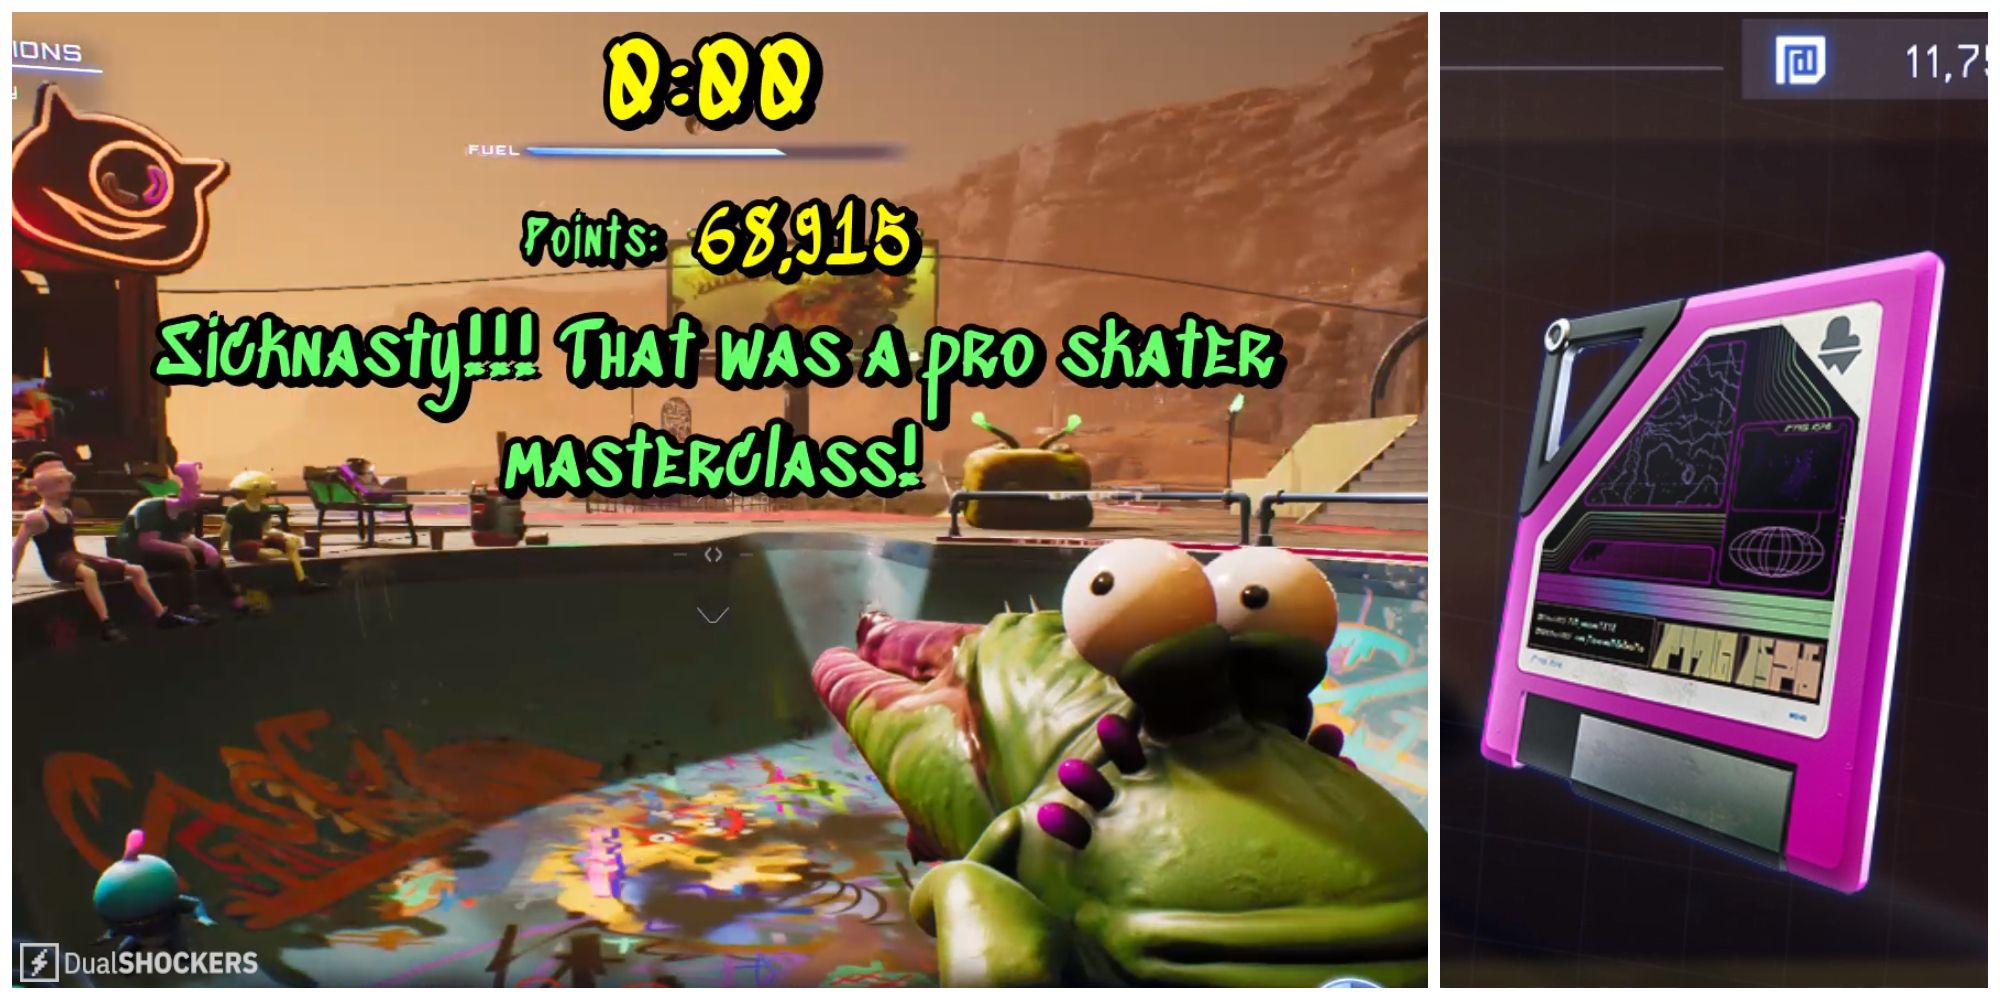 Split image of gameplay in the skate park and the Skate Park Warp Disc in High on Life.